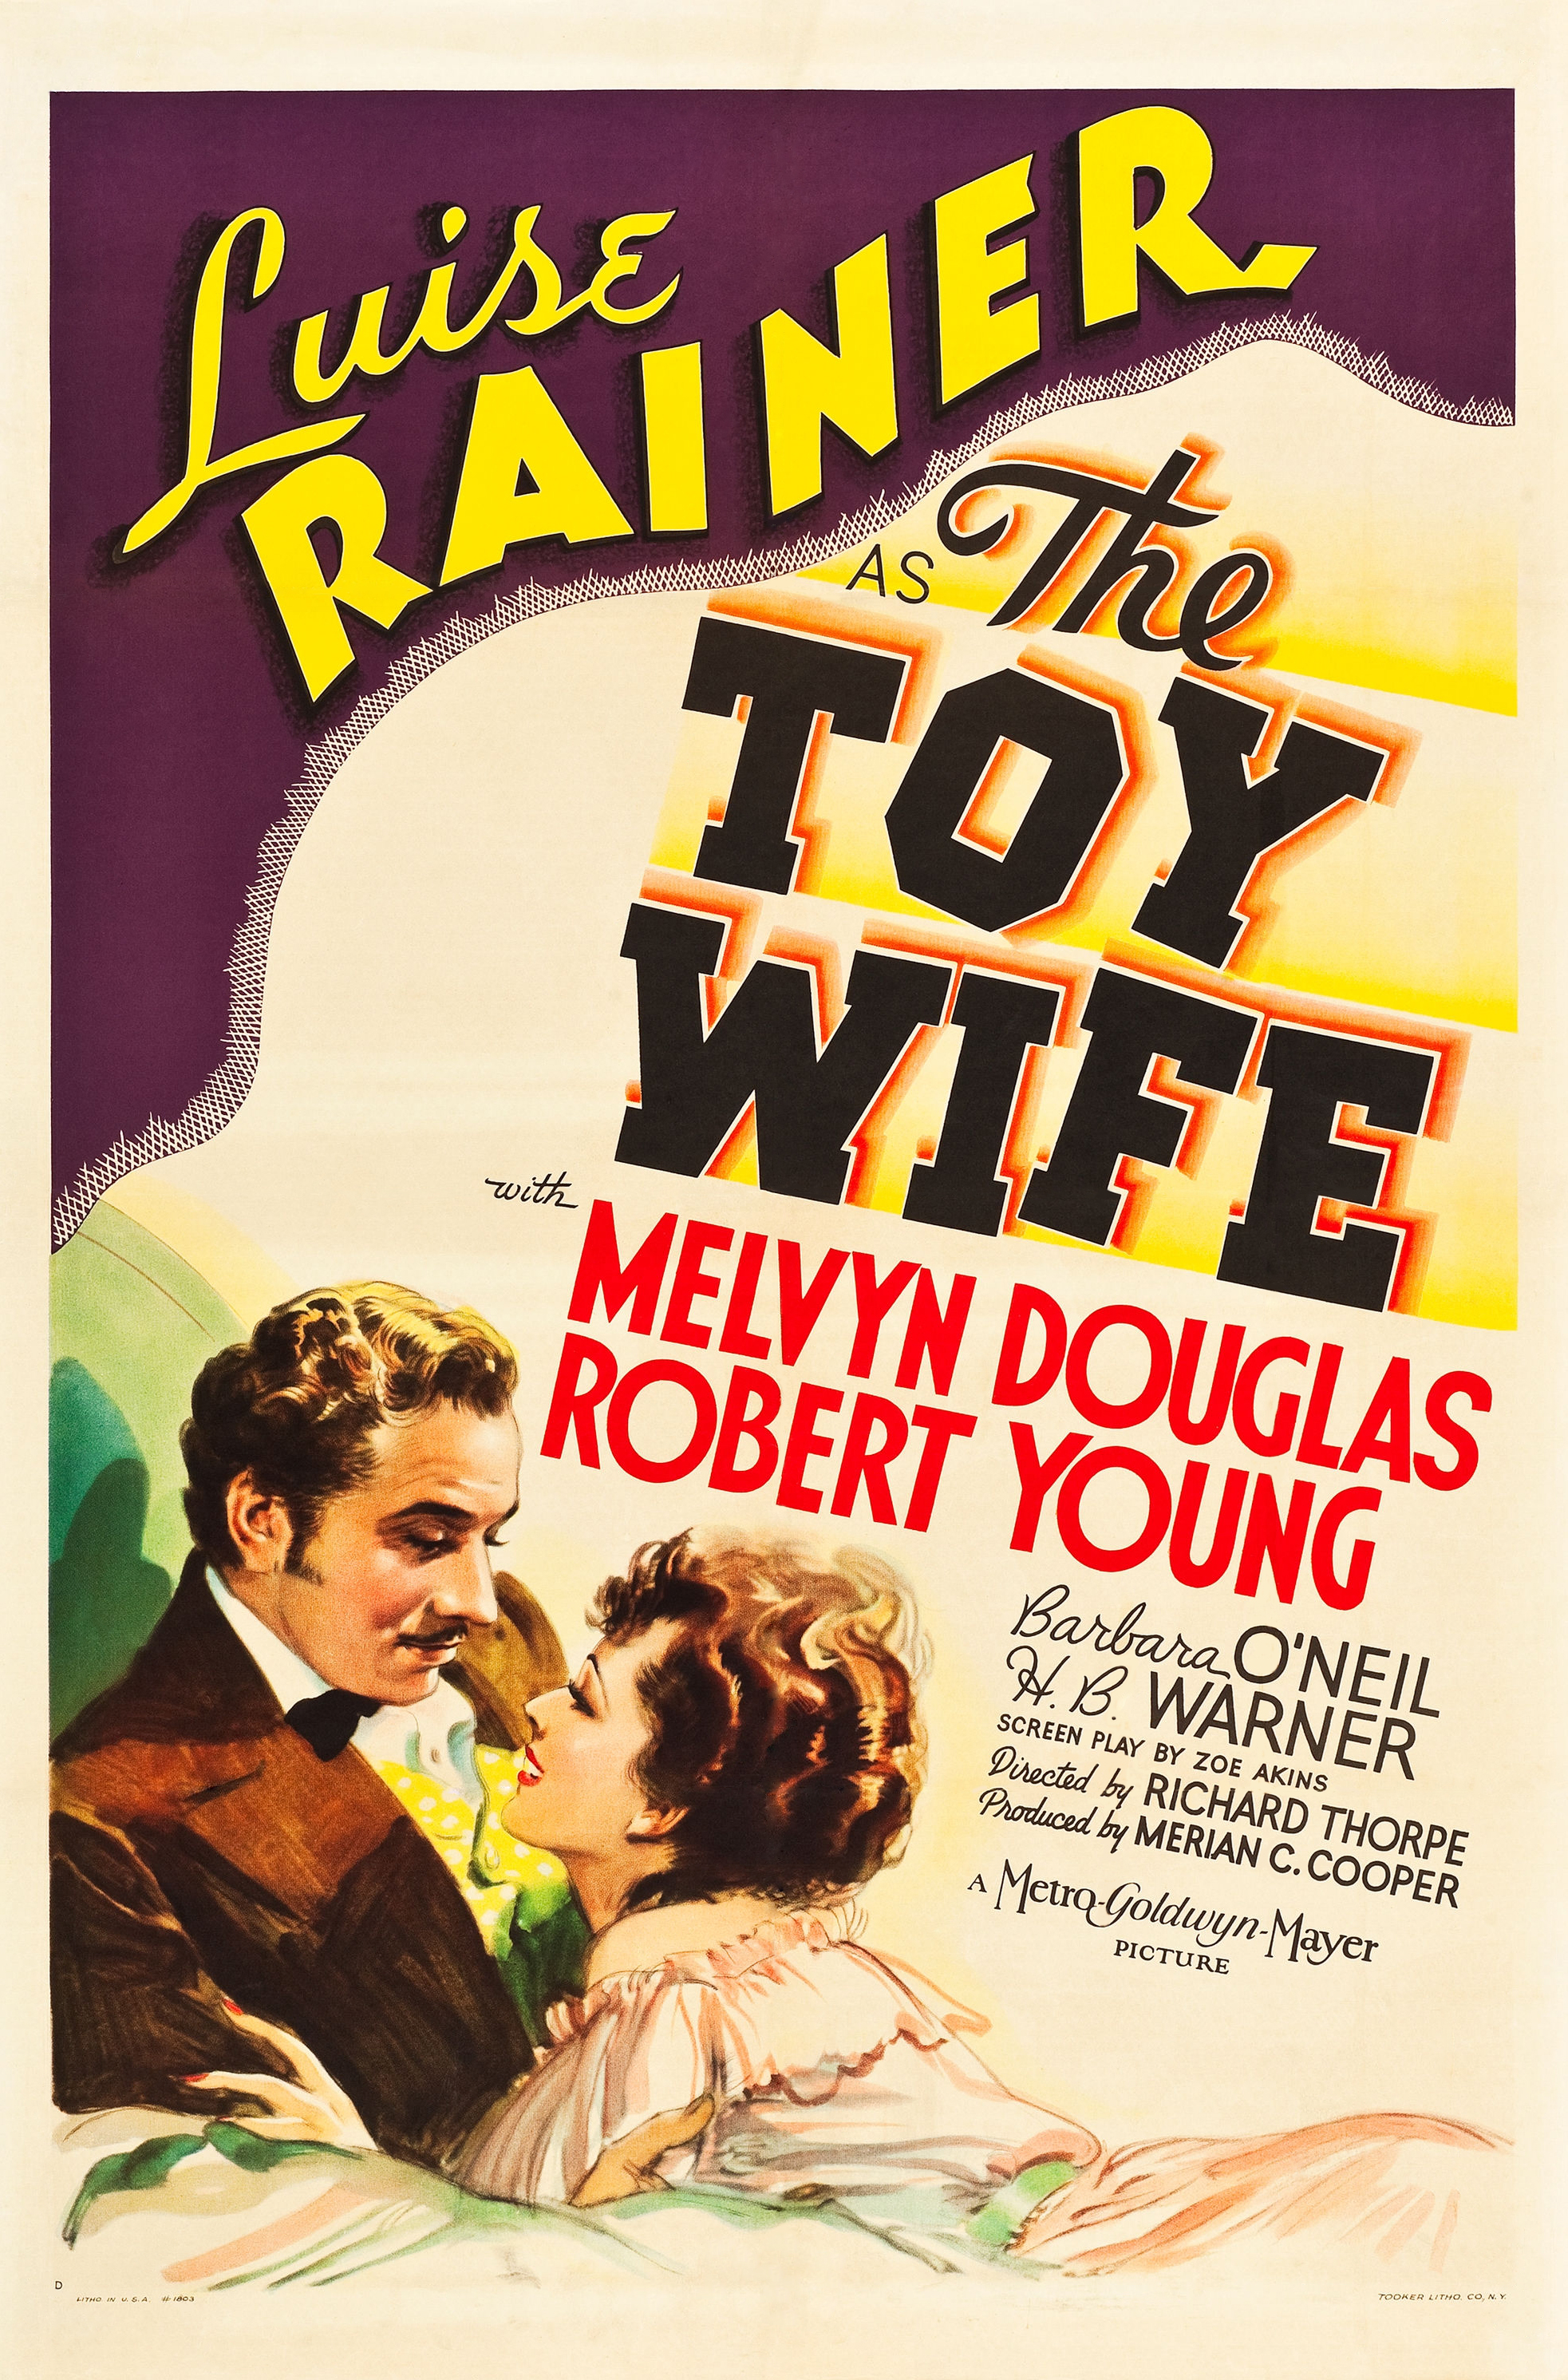 The Toy Wife (1938) starring Luise Rainer on DVD on DVD